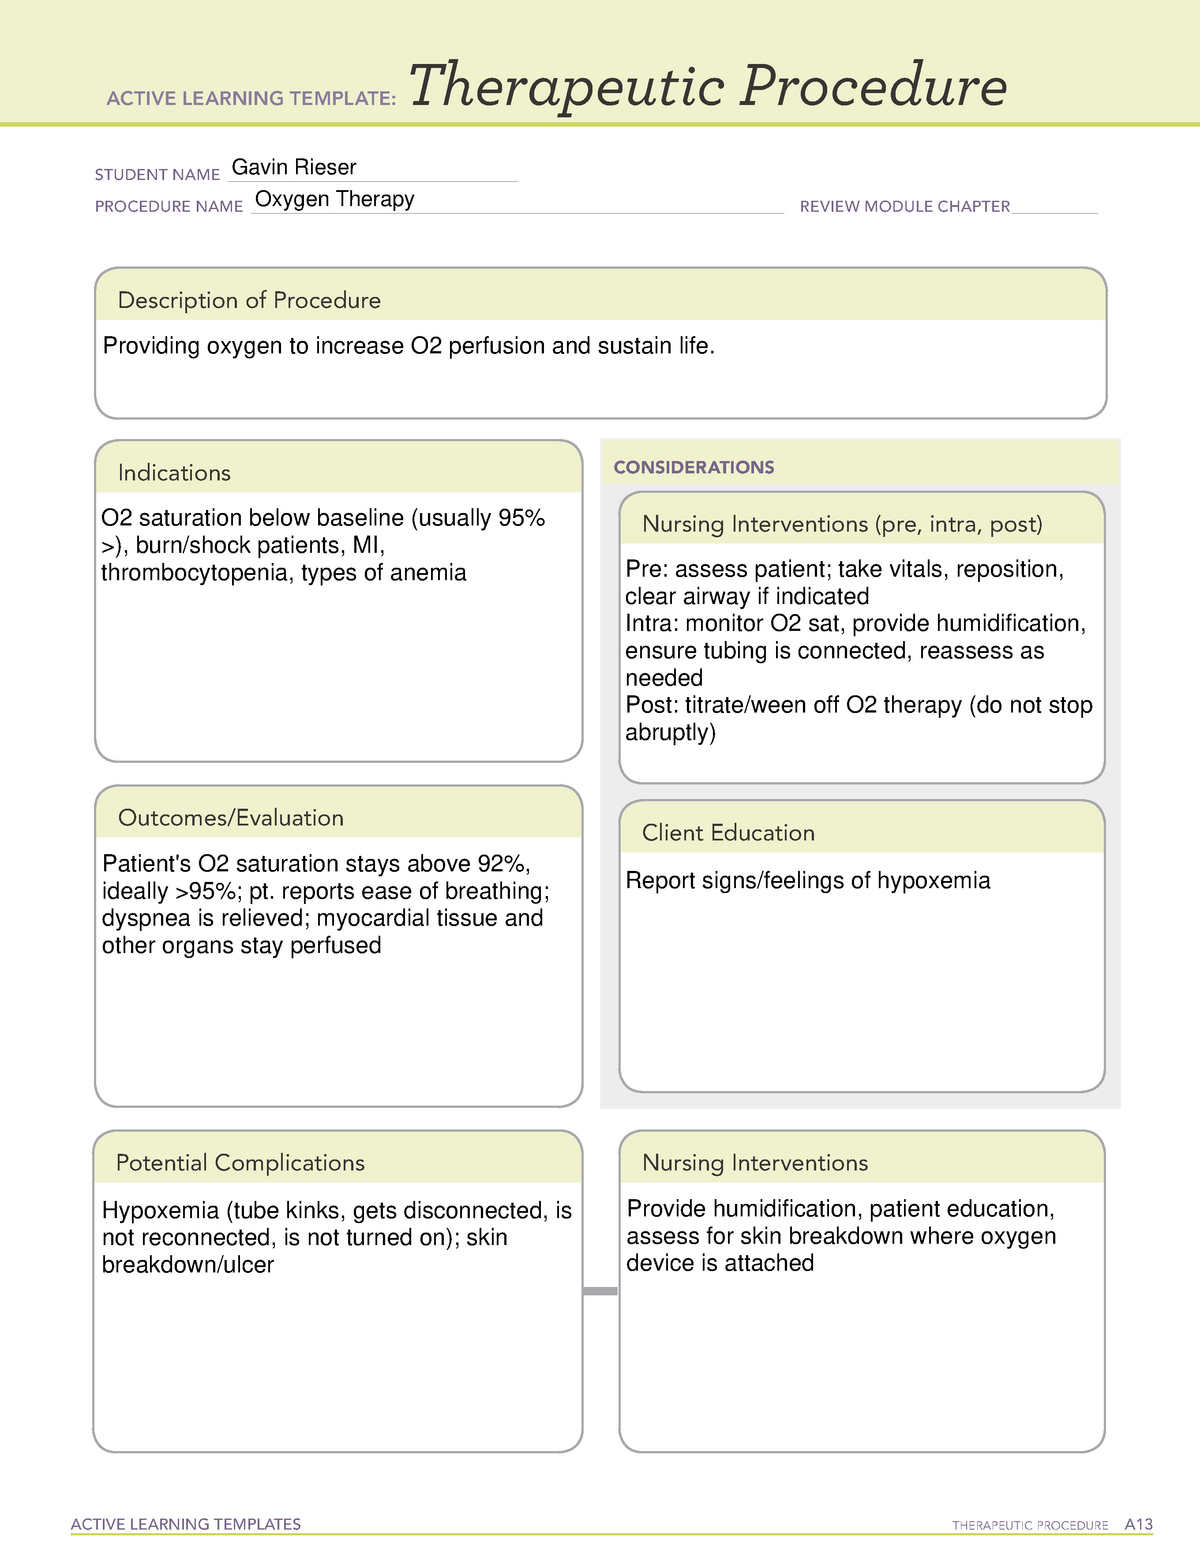 ATI Therapeutic oxygen therapy ACTIVE LEARNING TEMPLATES THERAPEUTIC